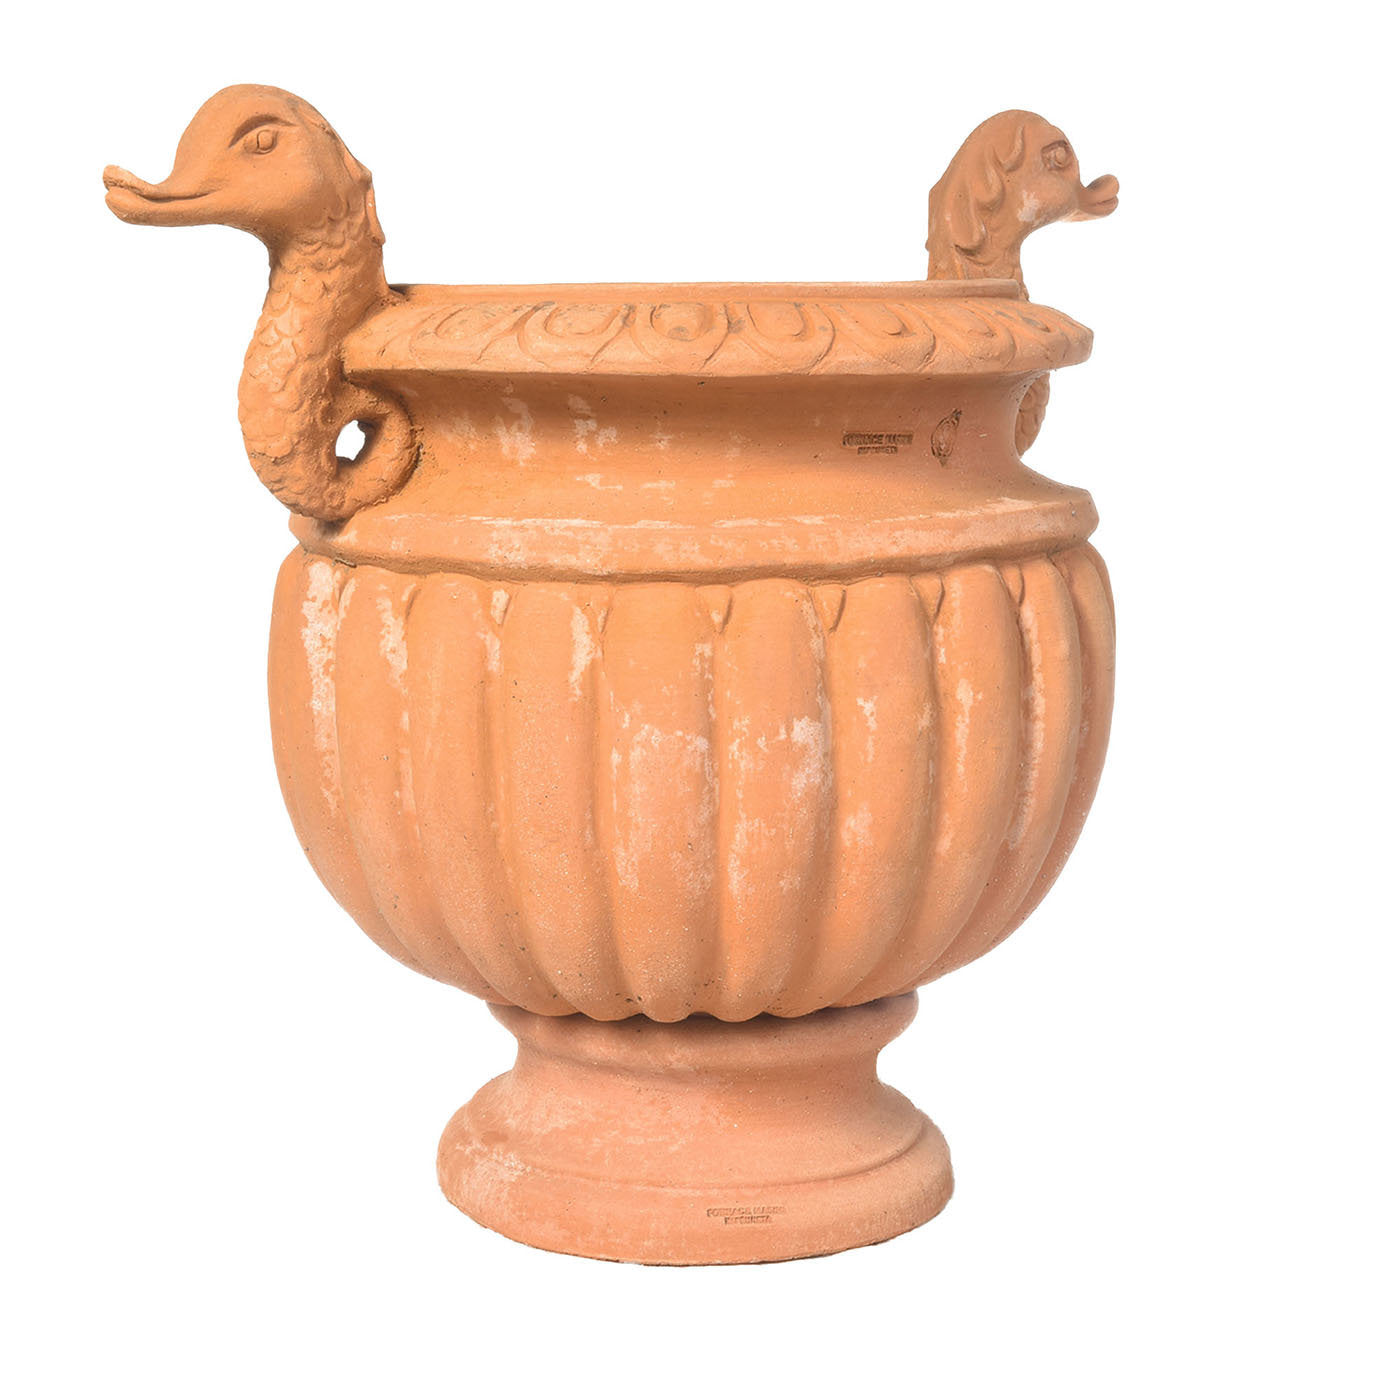 Vase with Dolphin-Shaped Handles - Main view